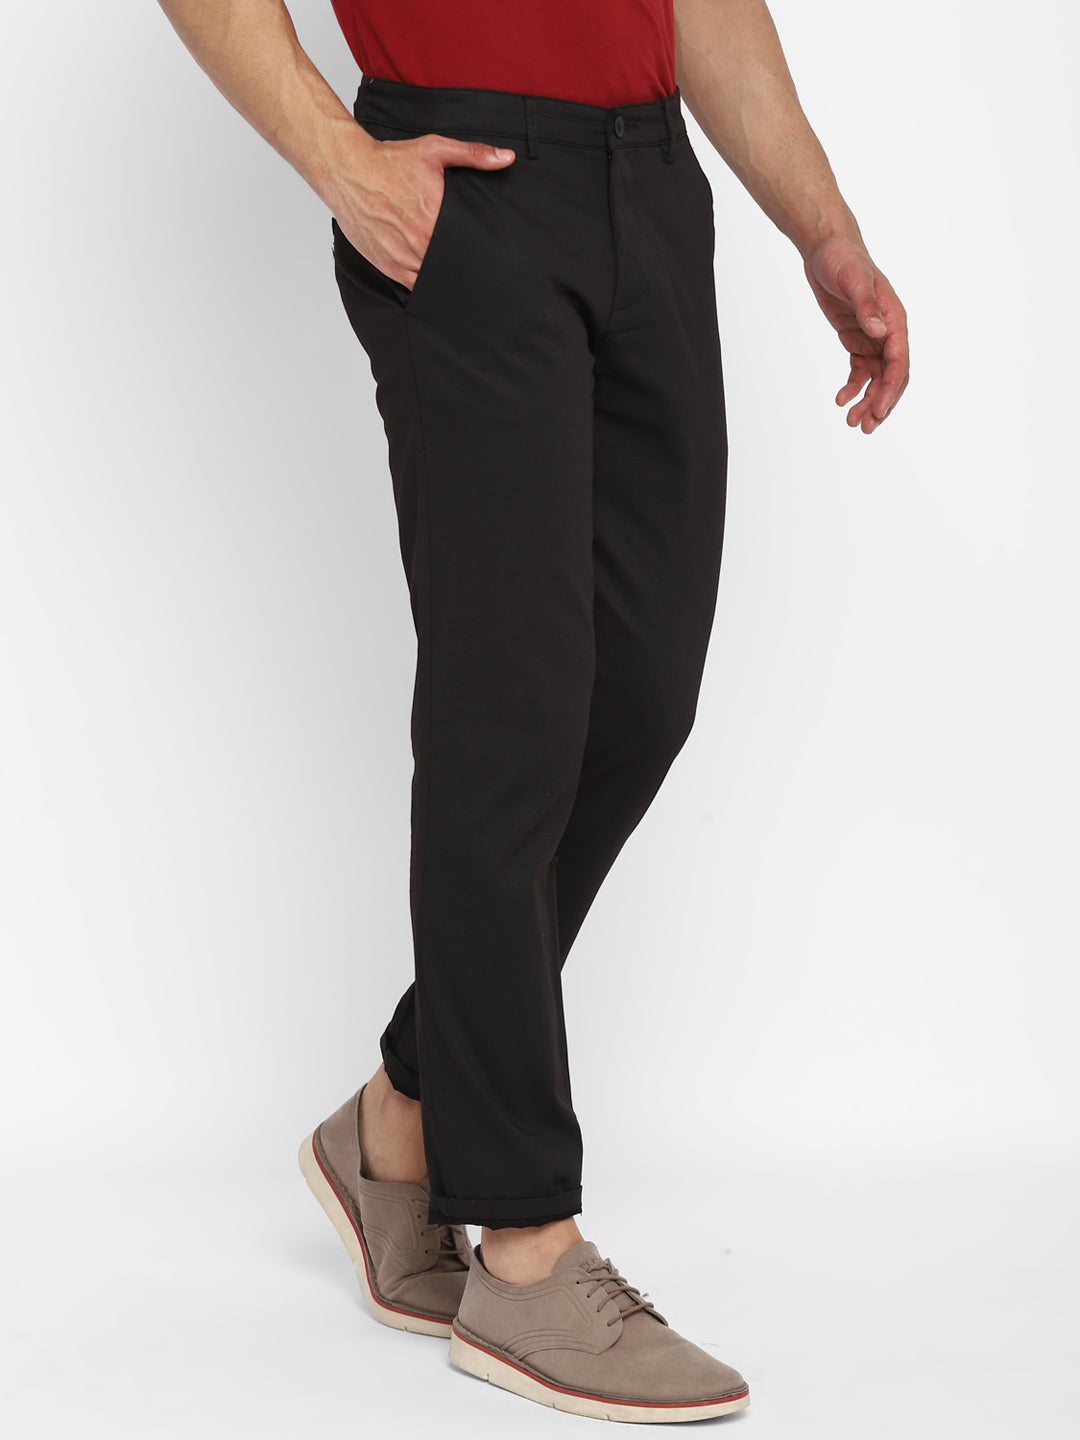 Cotton Stretch Black Printed Ultra Slim Fit Flat Front Casual Trouser